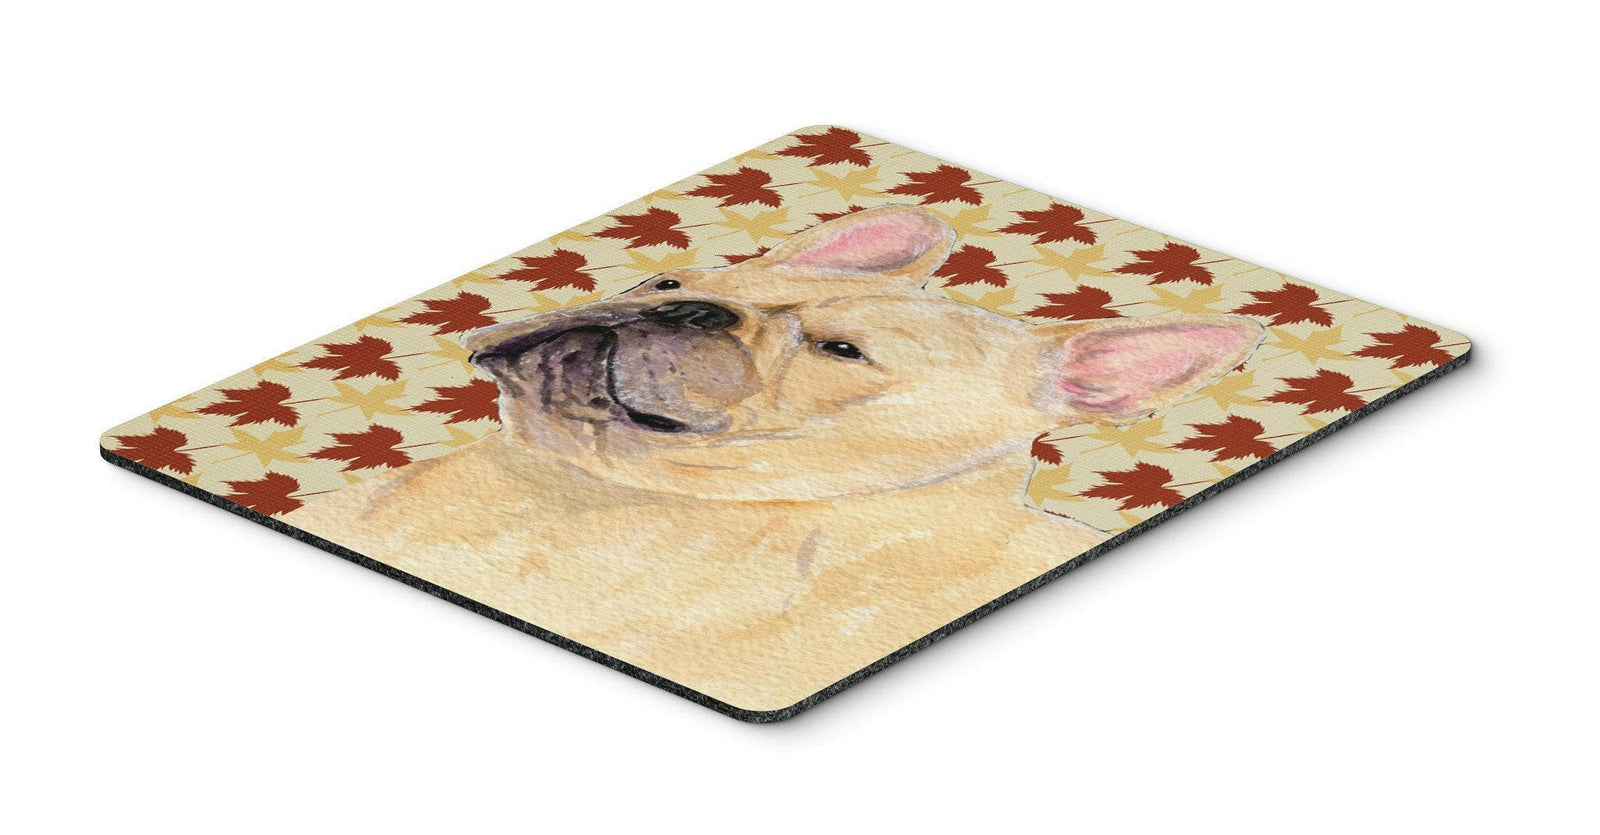 French Bulldog Fall Leaves Portrait Mouse Pad, Hot Pad or Trivet by Caroline's Treasures